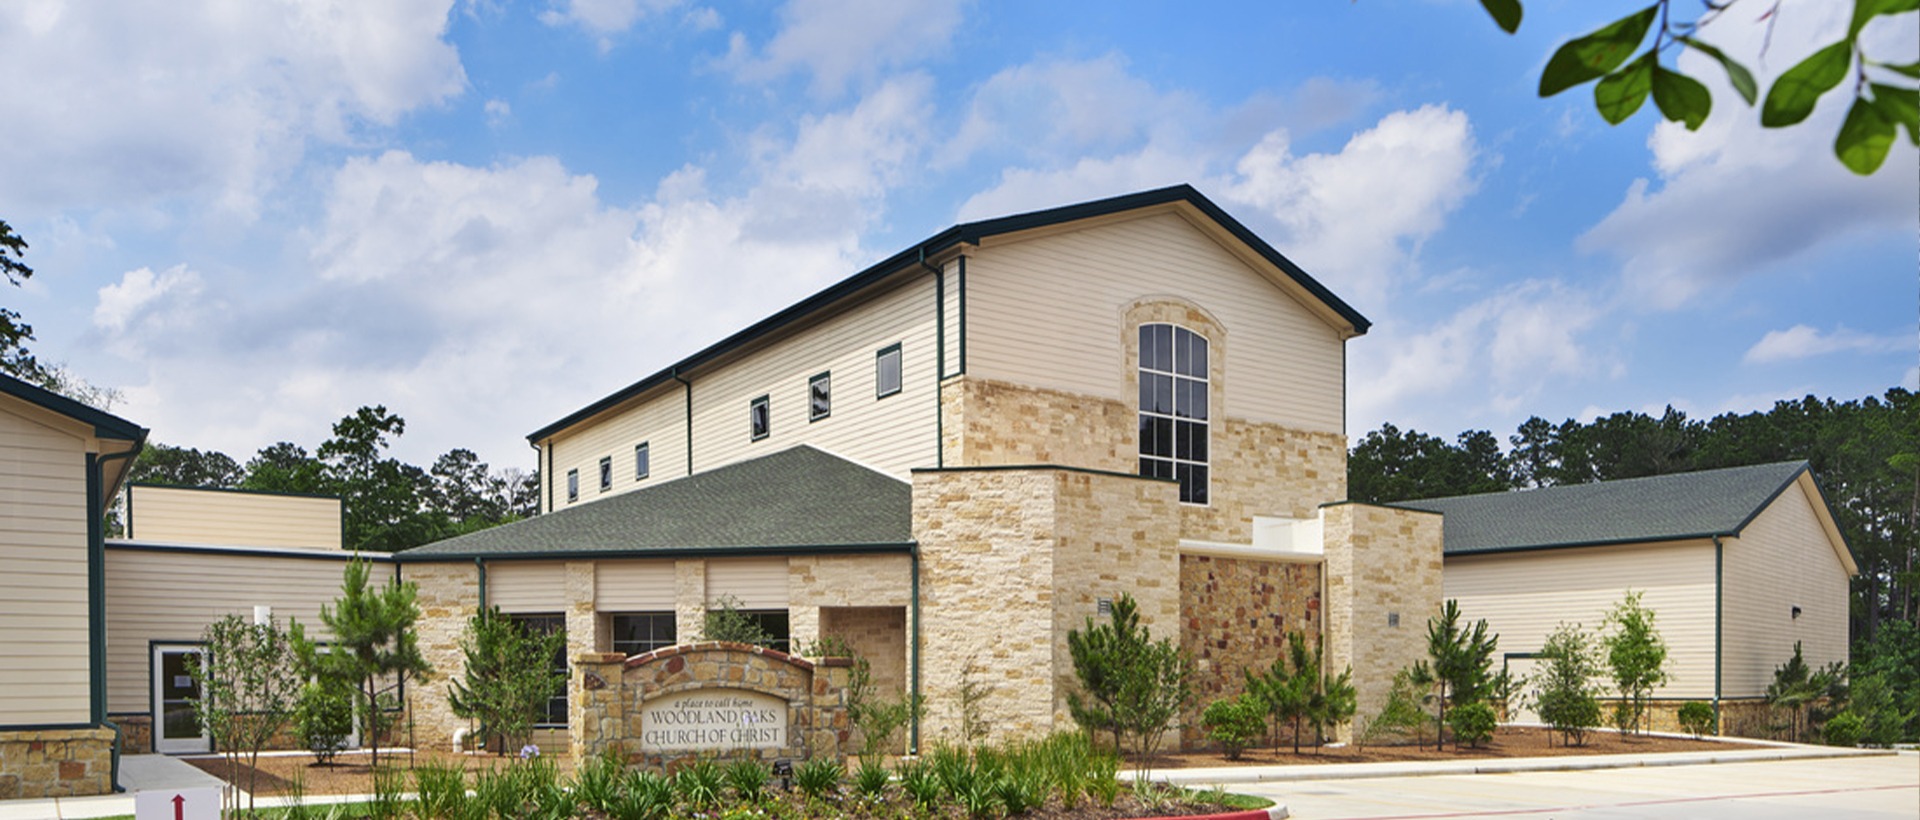 The Woodlands Church of Christ - Schulte Roofing